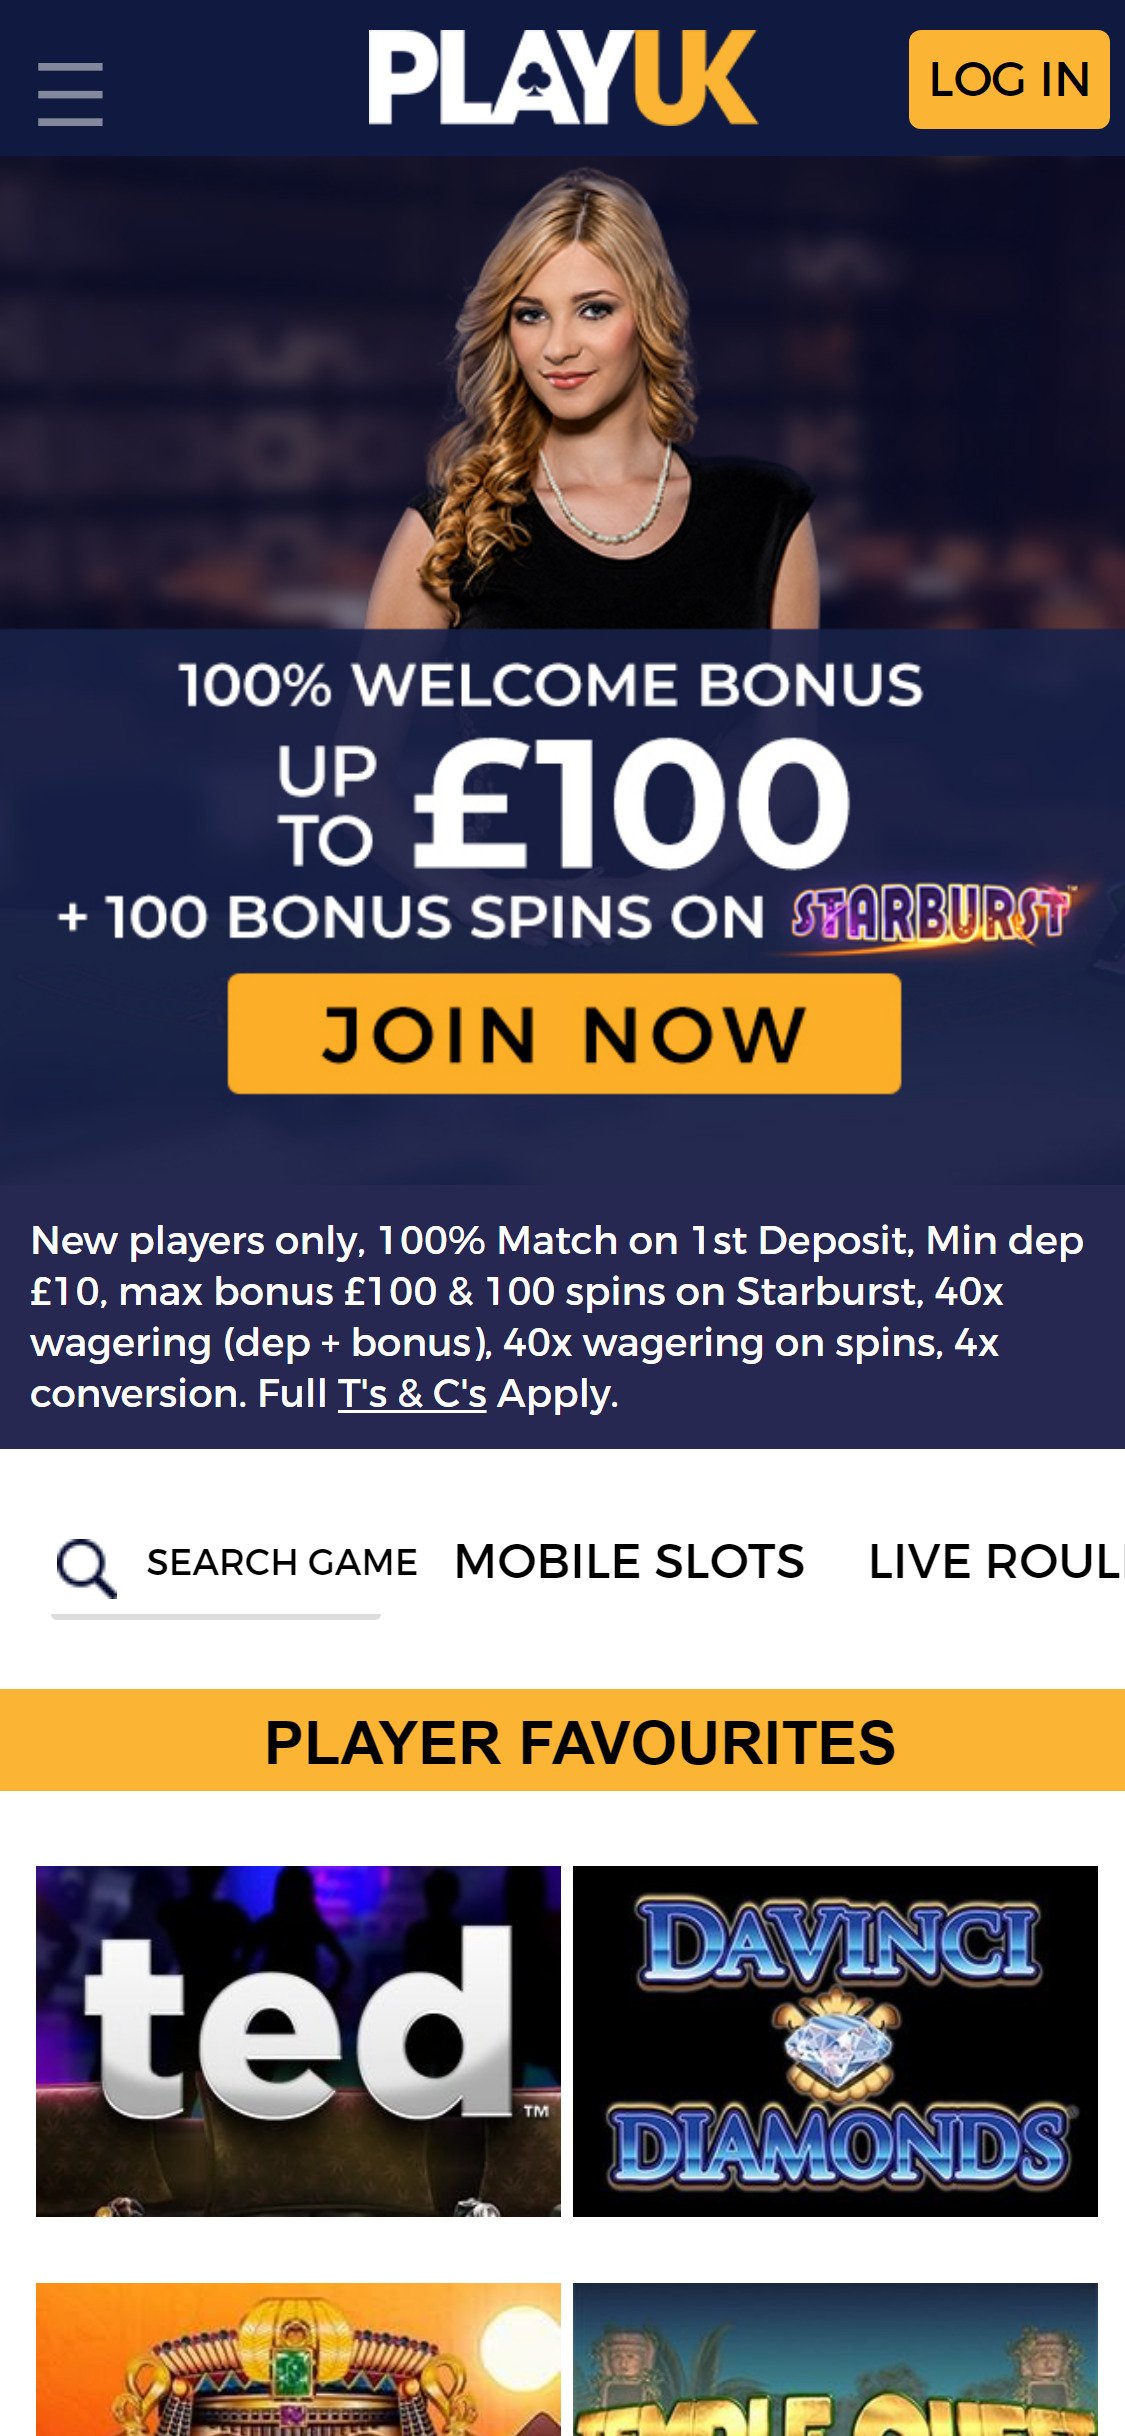 Play UK Casino Mobile Review